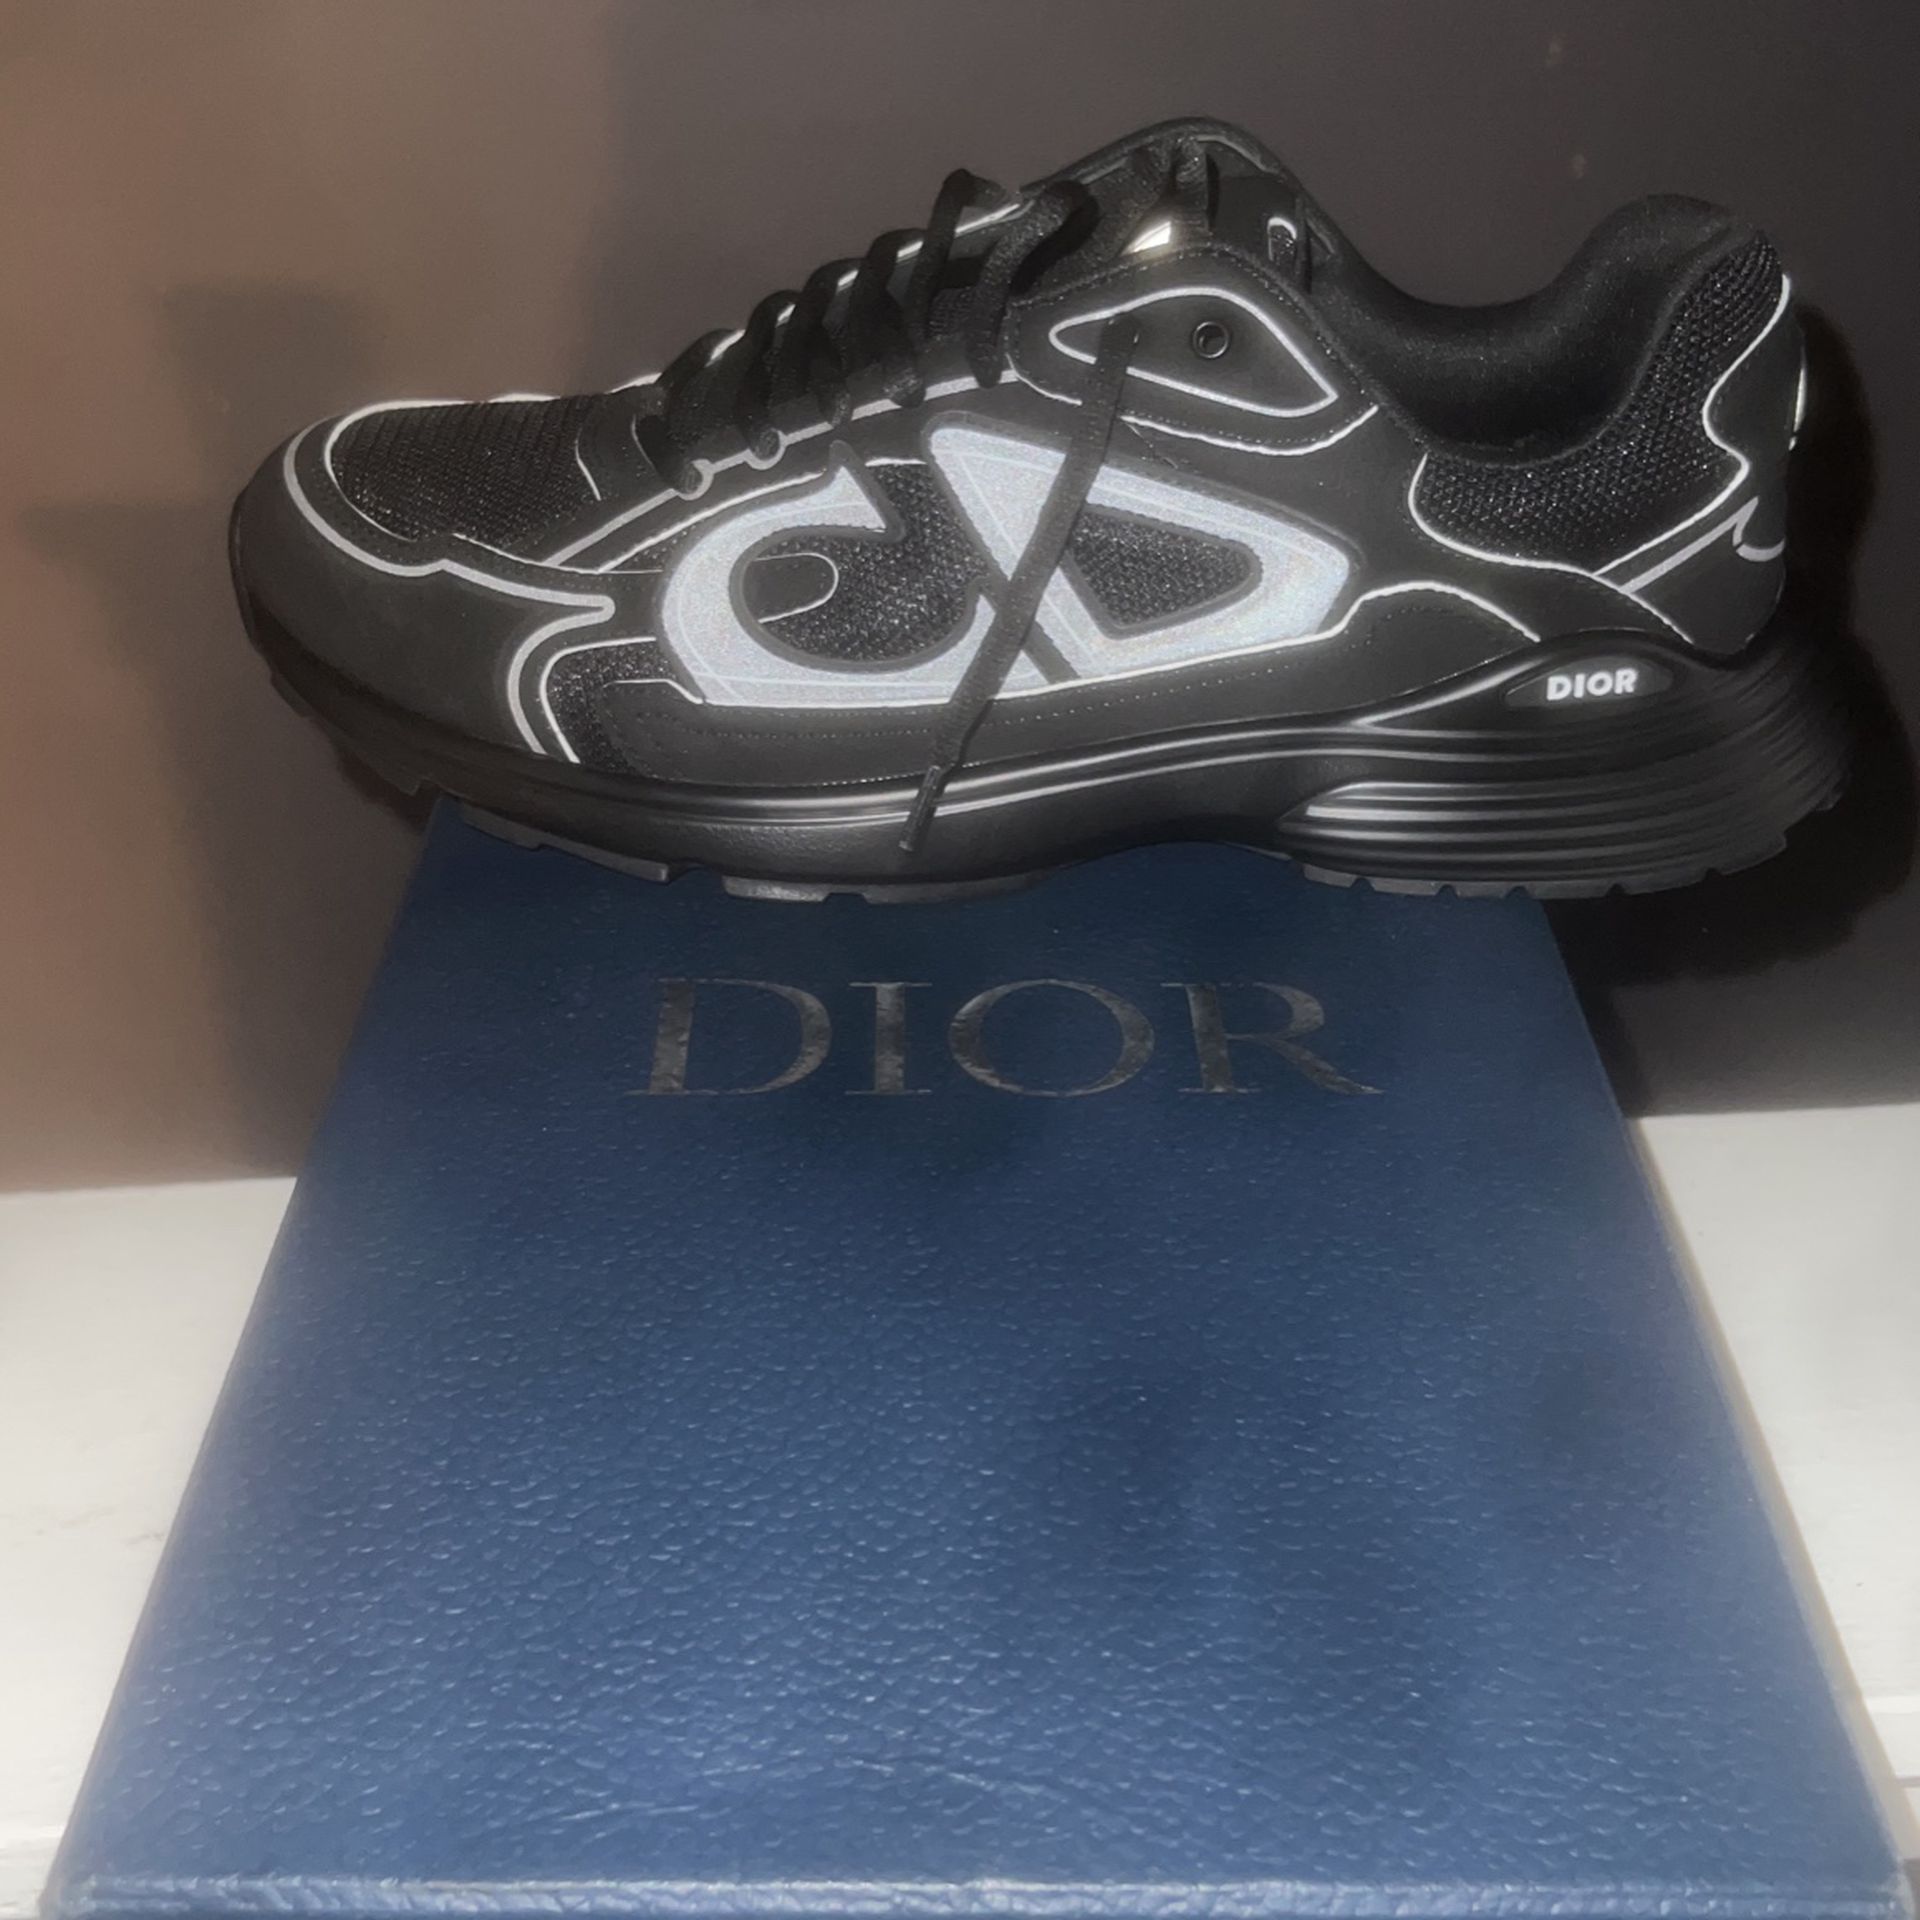 Christian Dior B30 Size 11 for Sale in Baltimore, MD - OfferUp